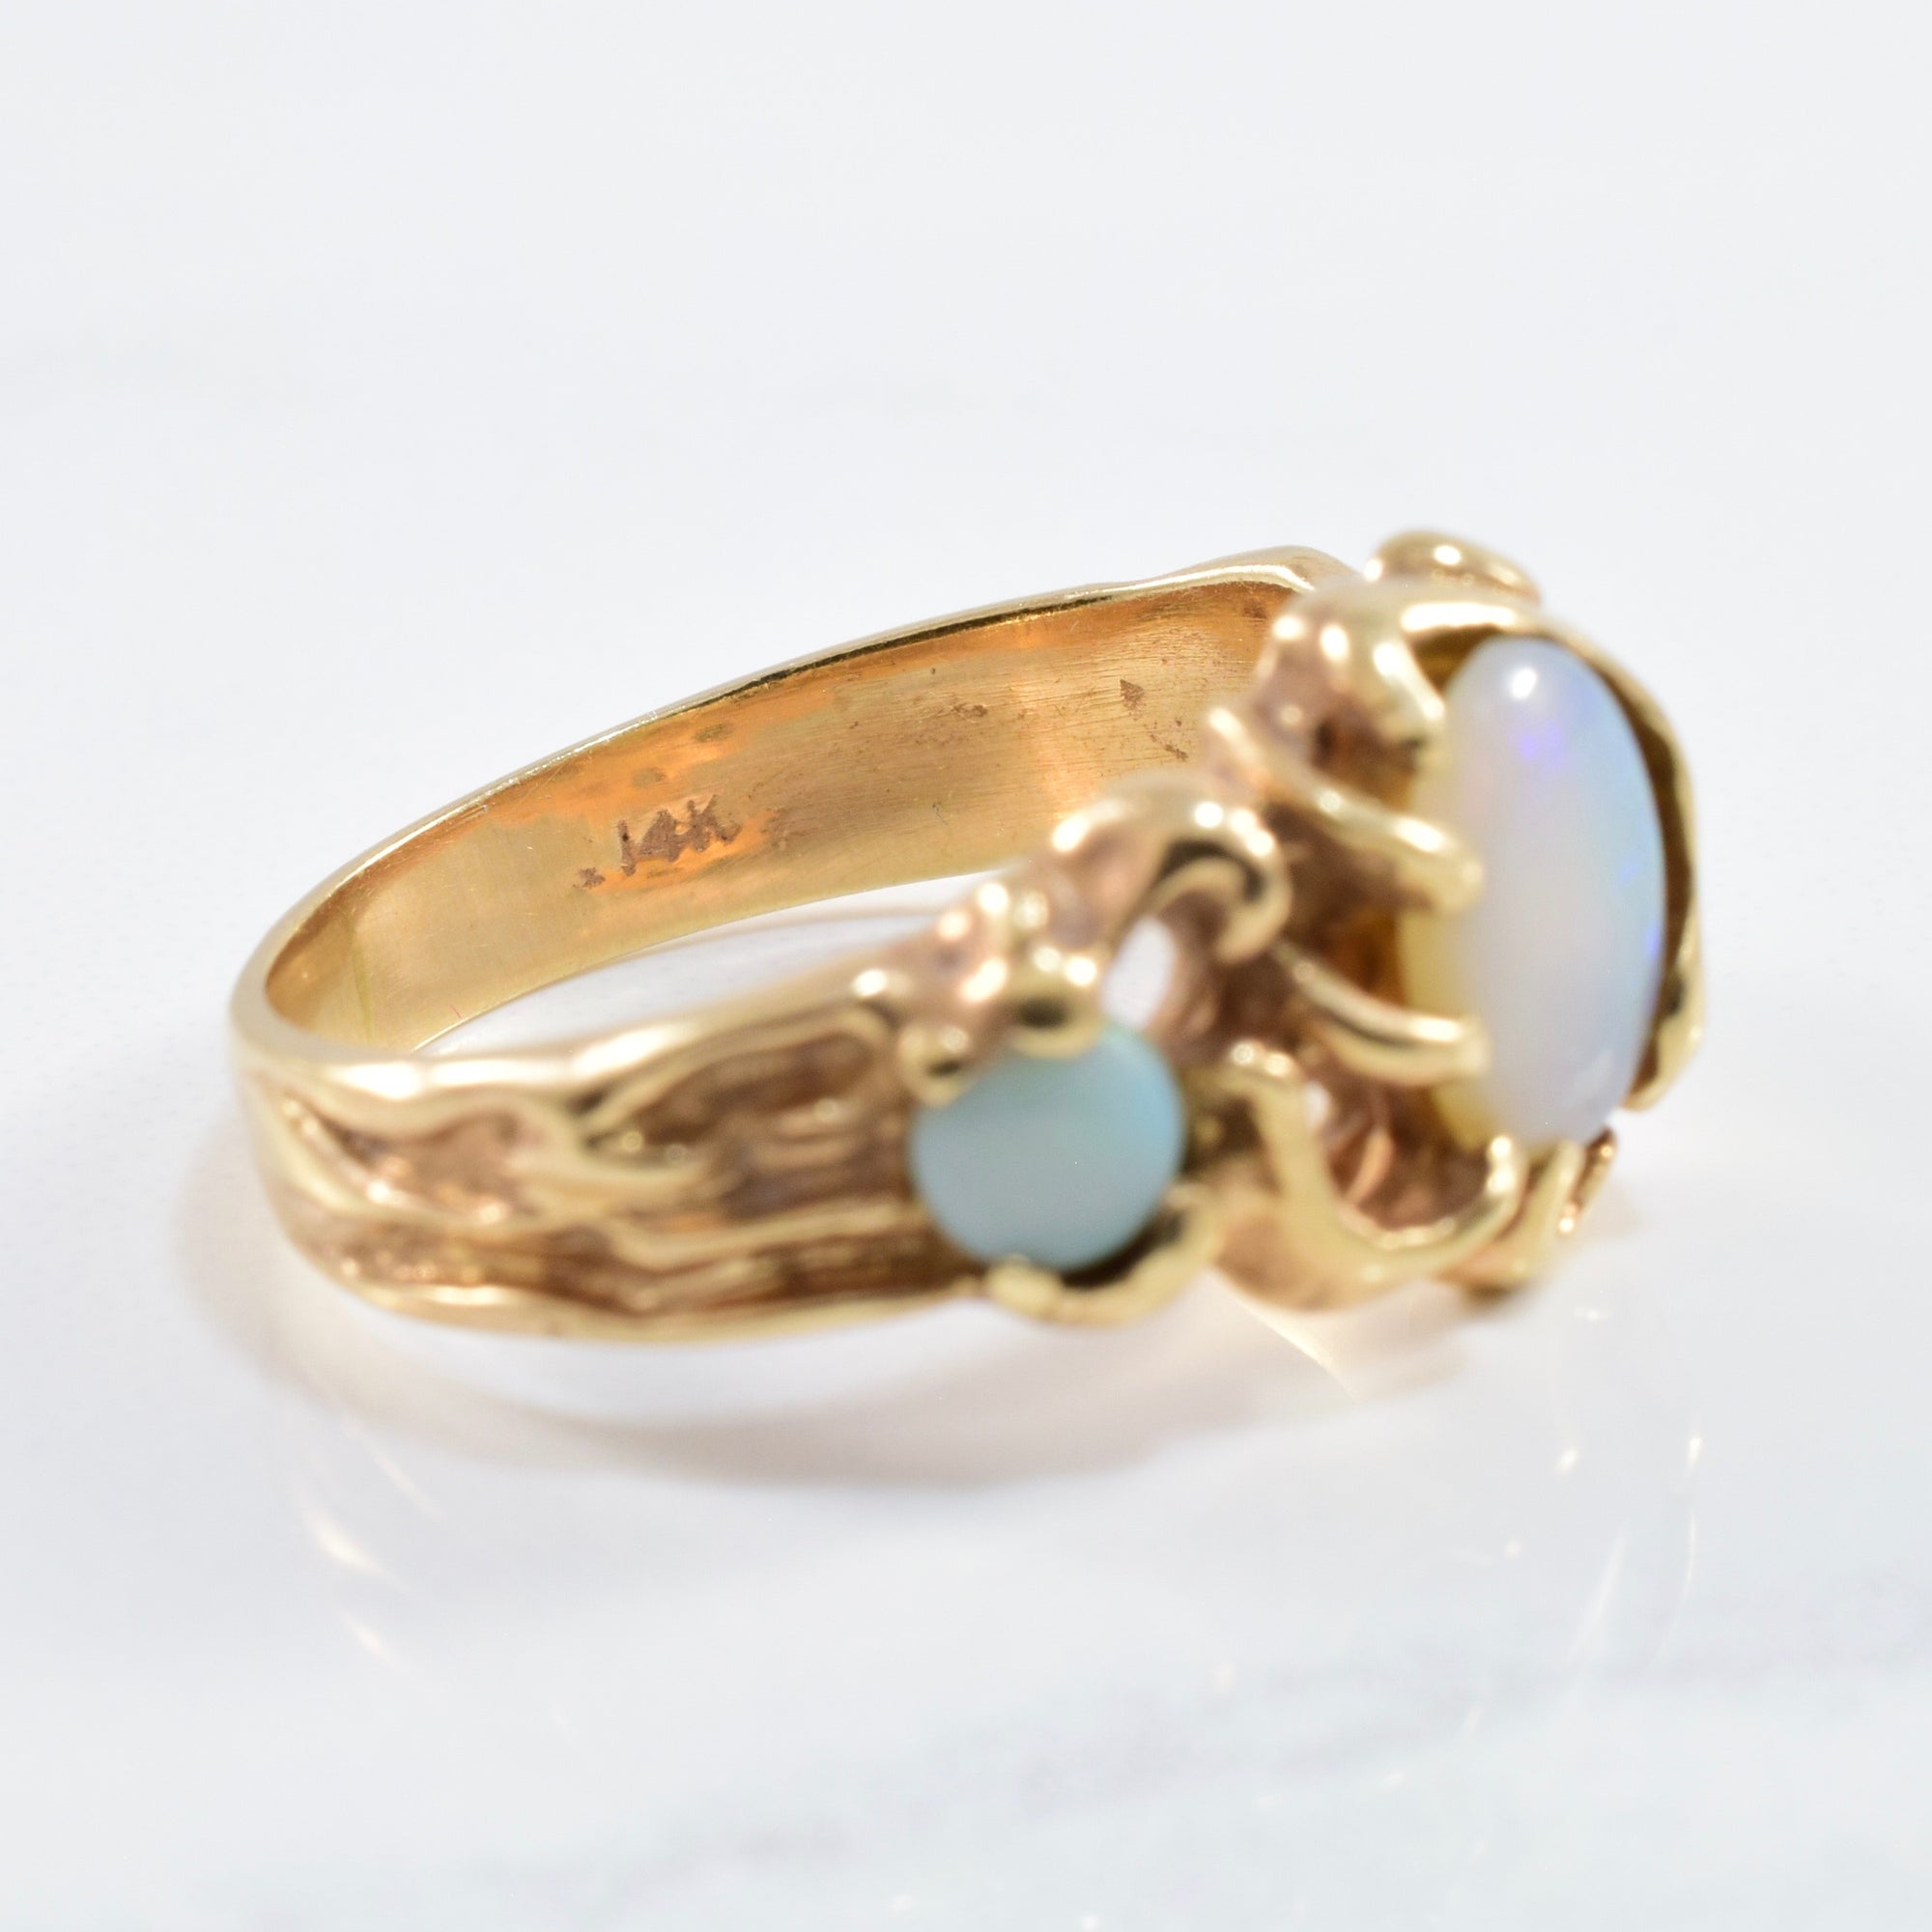 Vintage Abstract Opal Ring | 0.80ctw | SZ 7.5 |